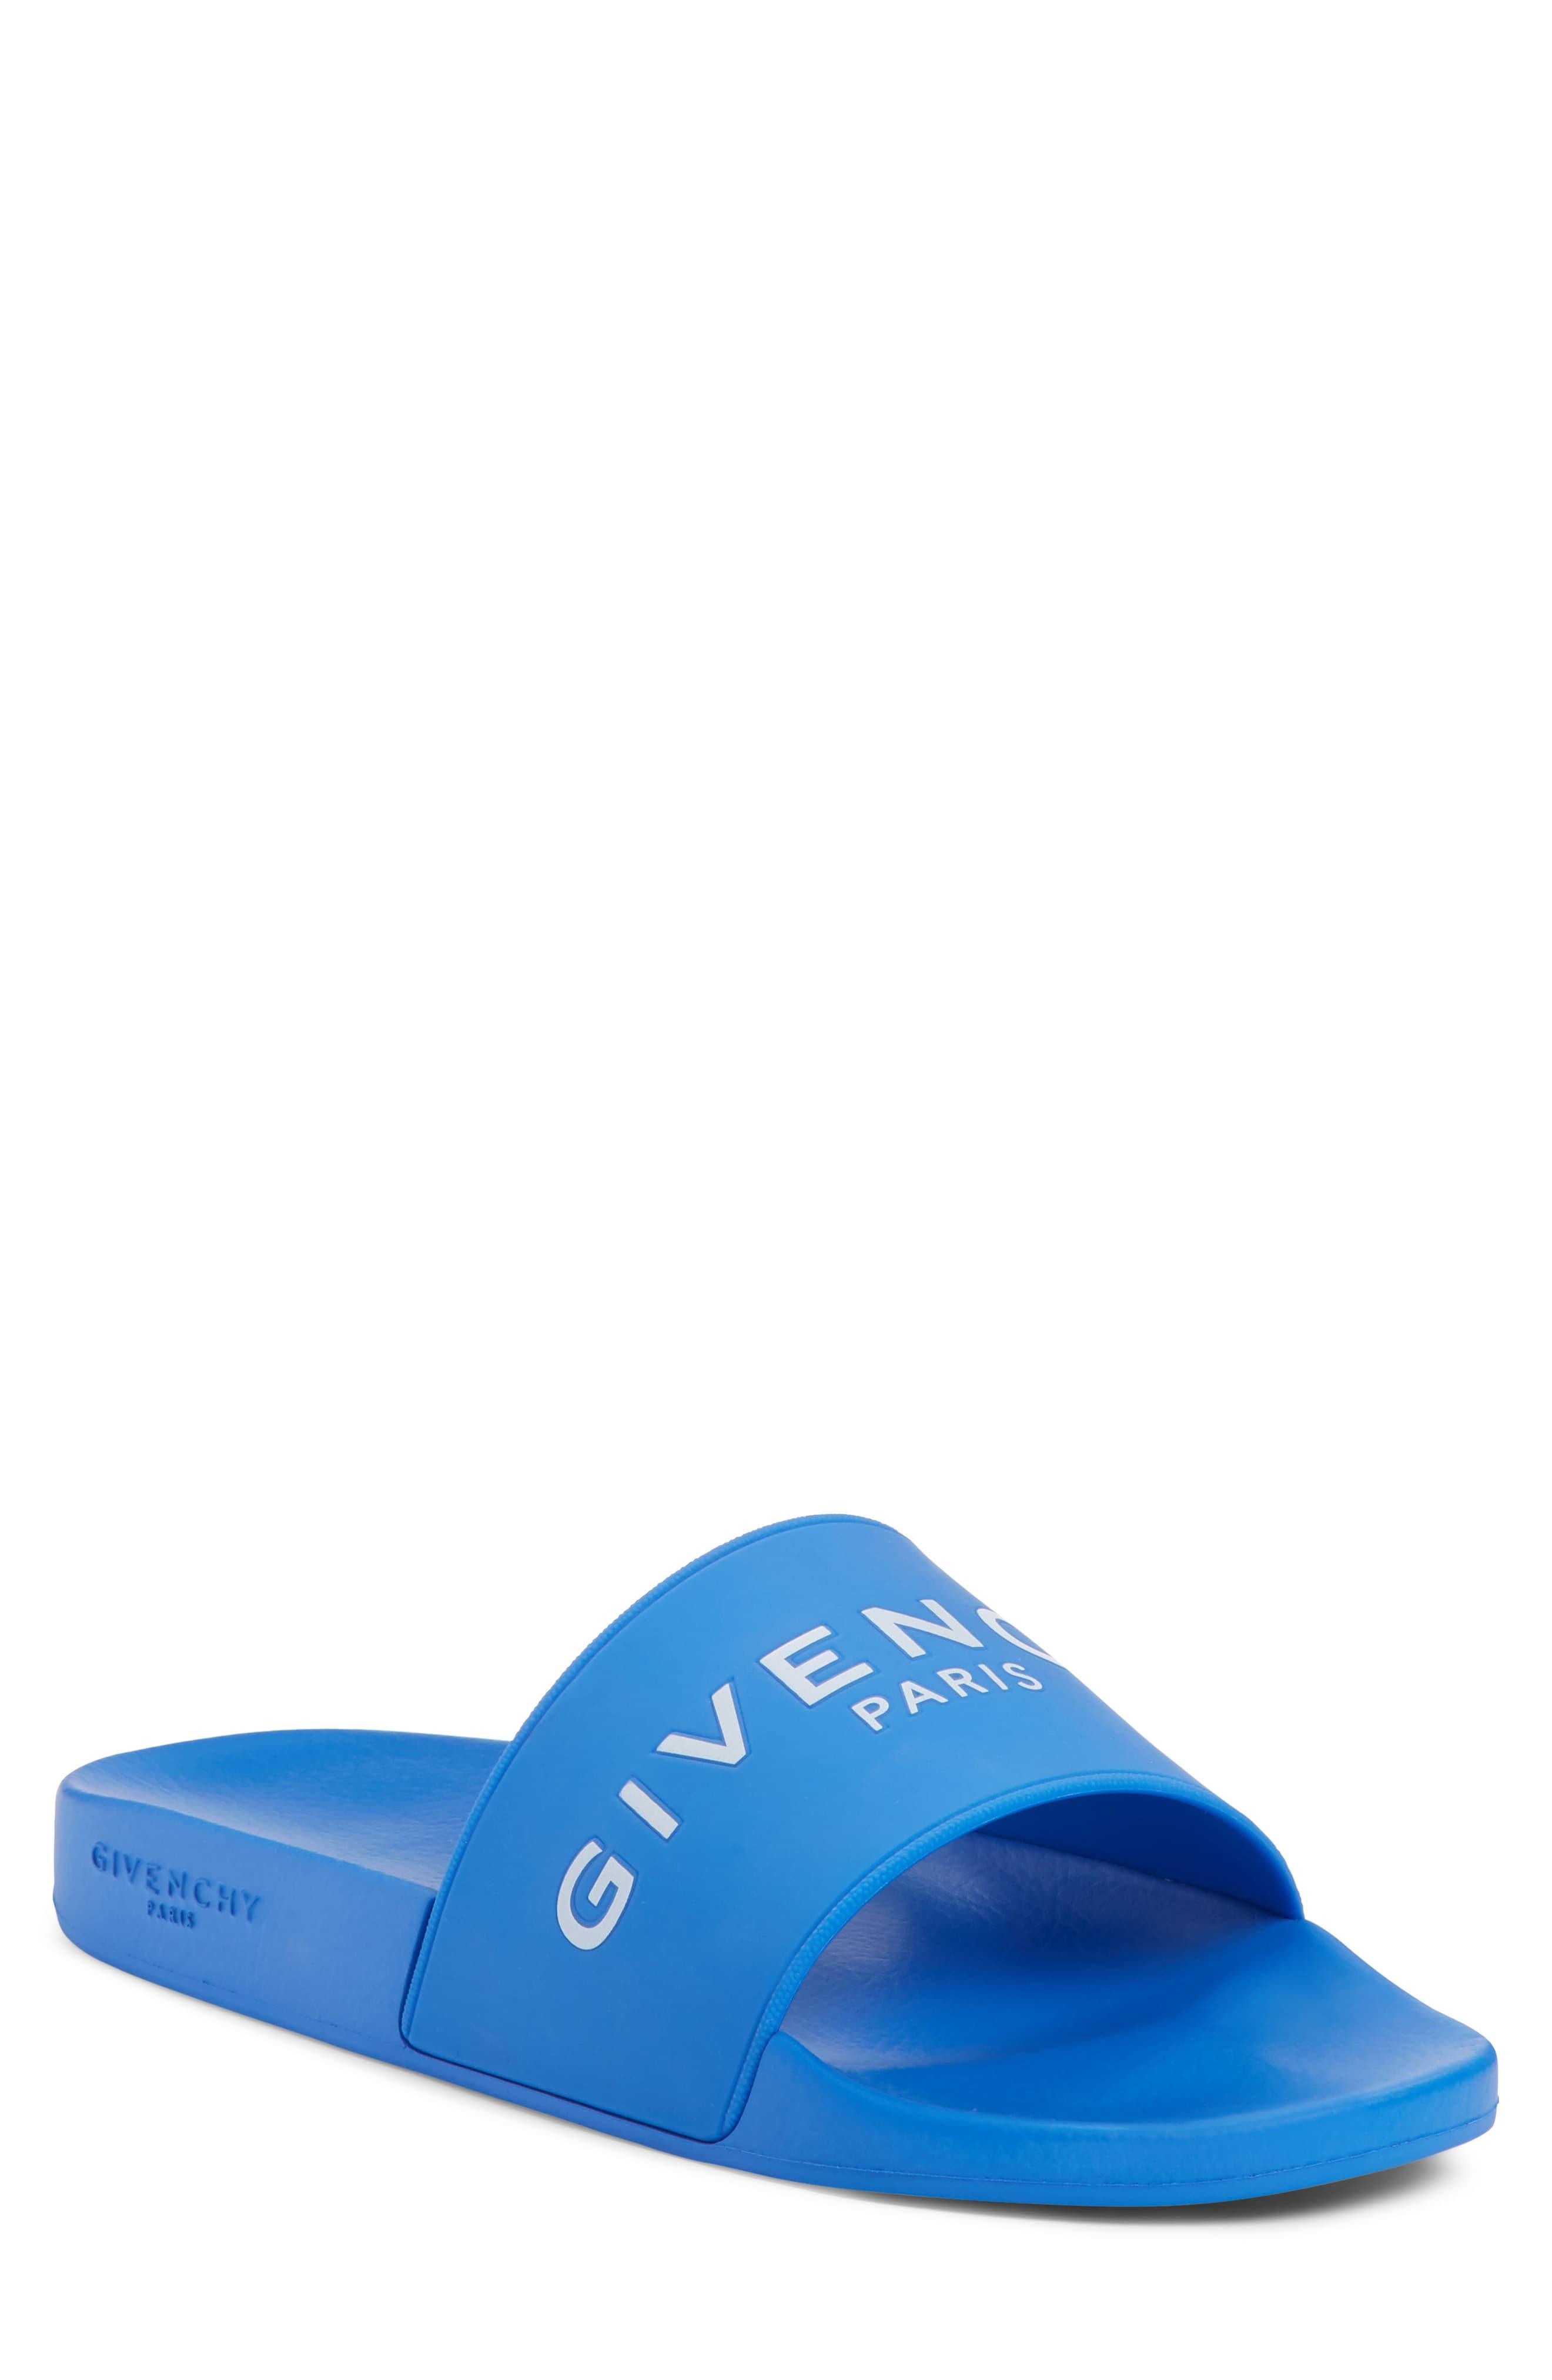 blue givenchy sliders